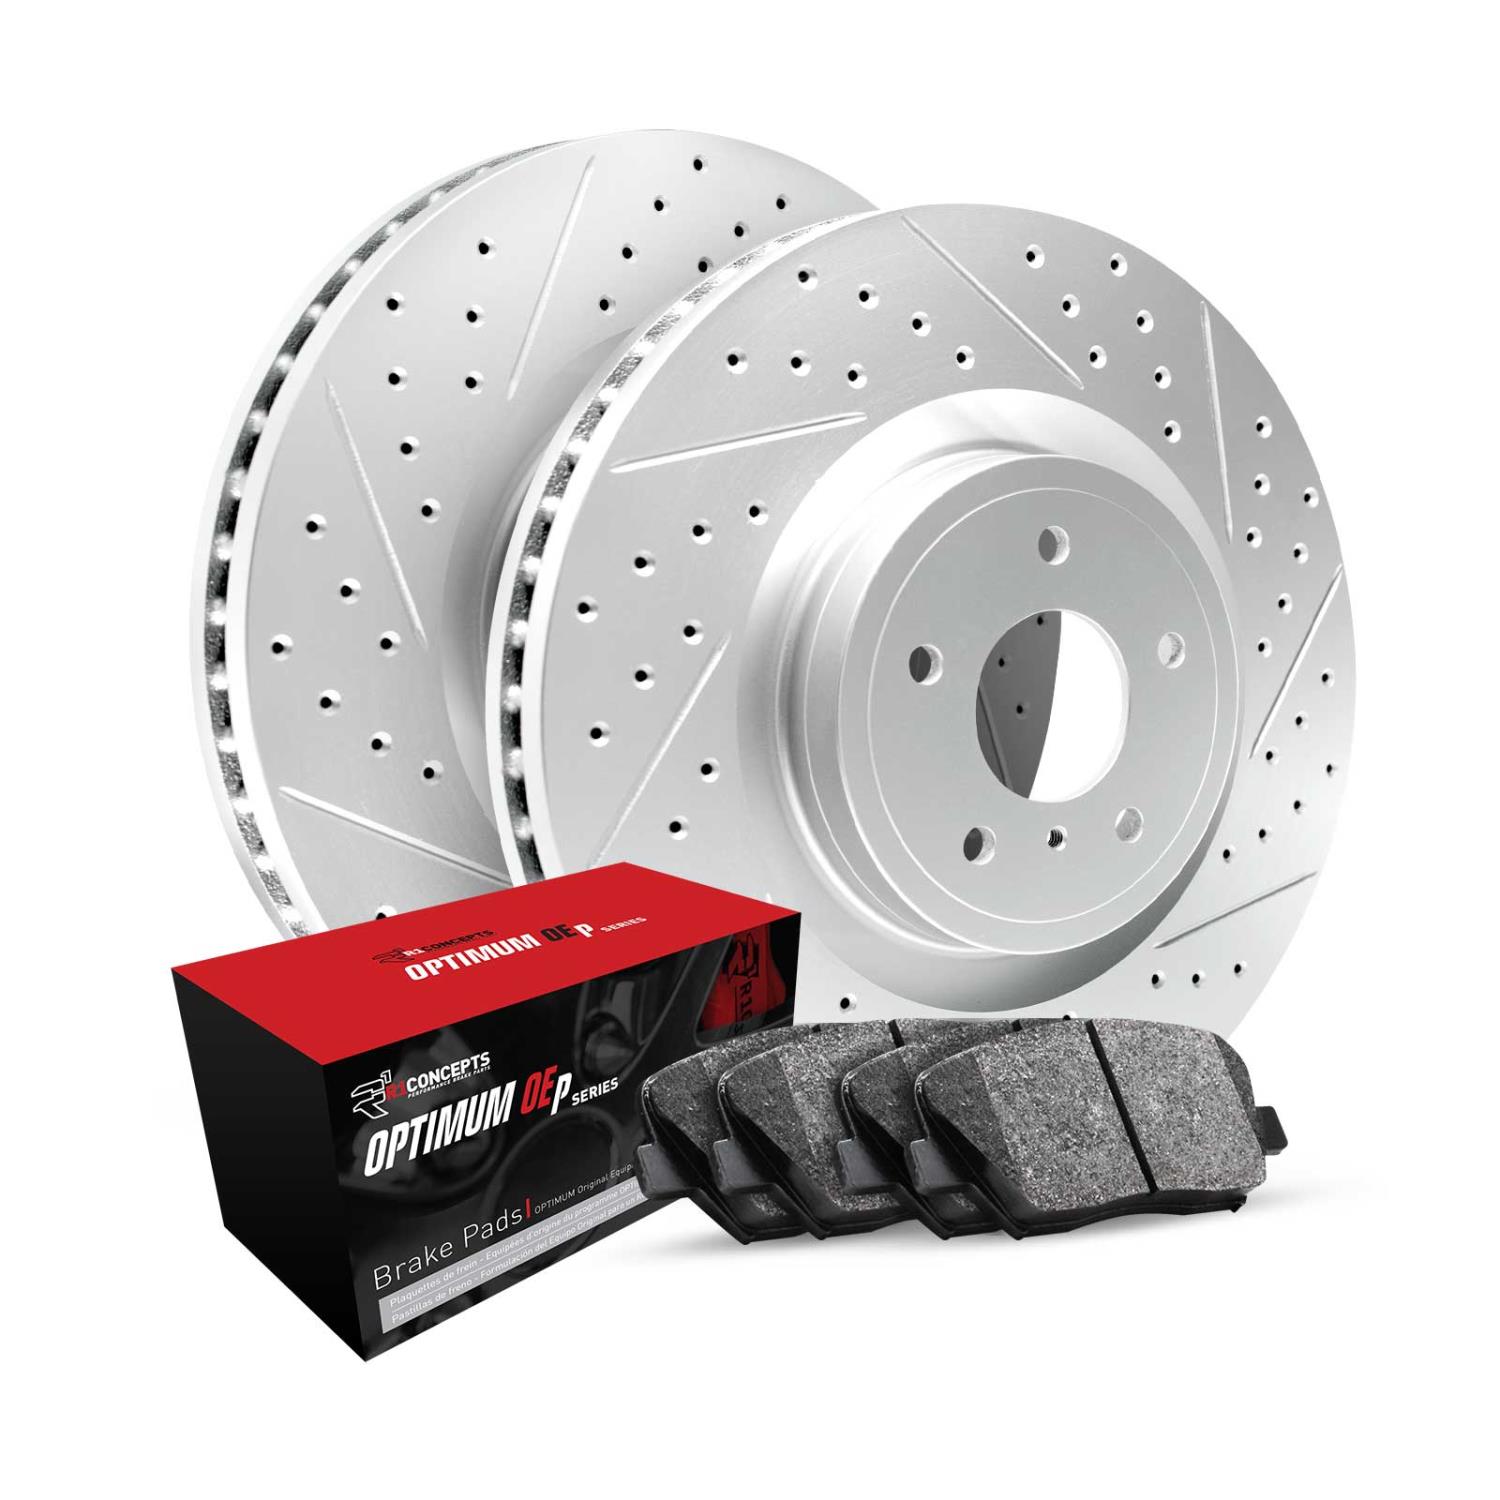 GEO-Carbon Drilled & Slotted Brake Rotor Set w/Optimum OE Pads, 1996-2015 Fits Multiple Makes/Models, Position: Front